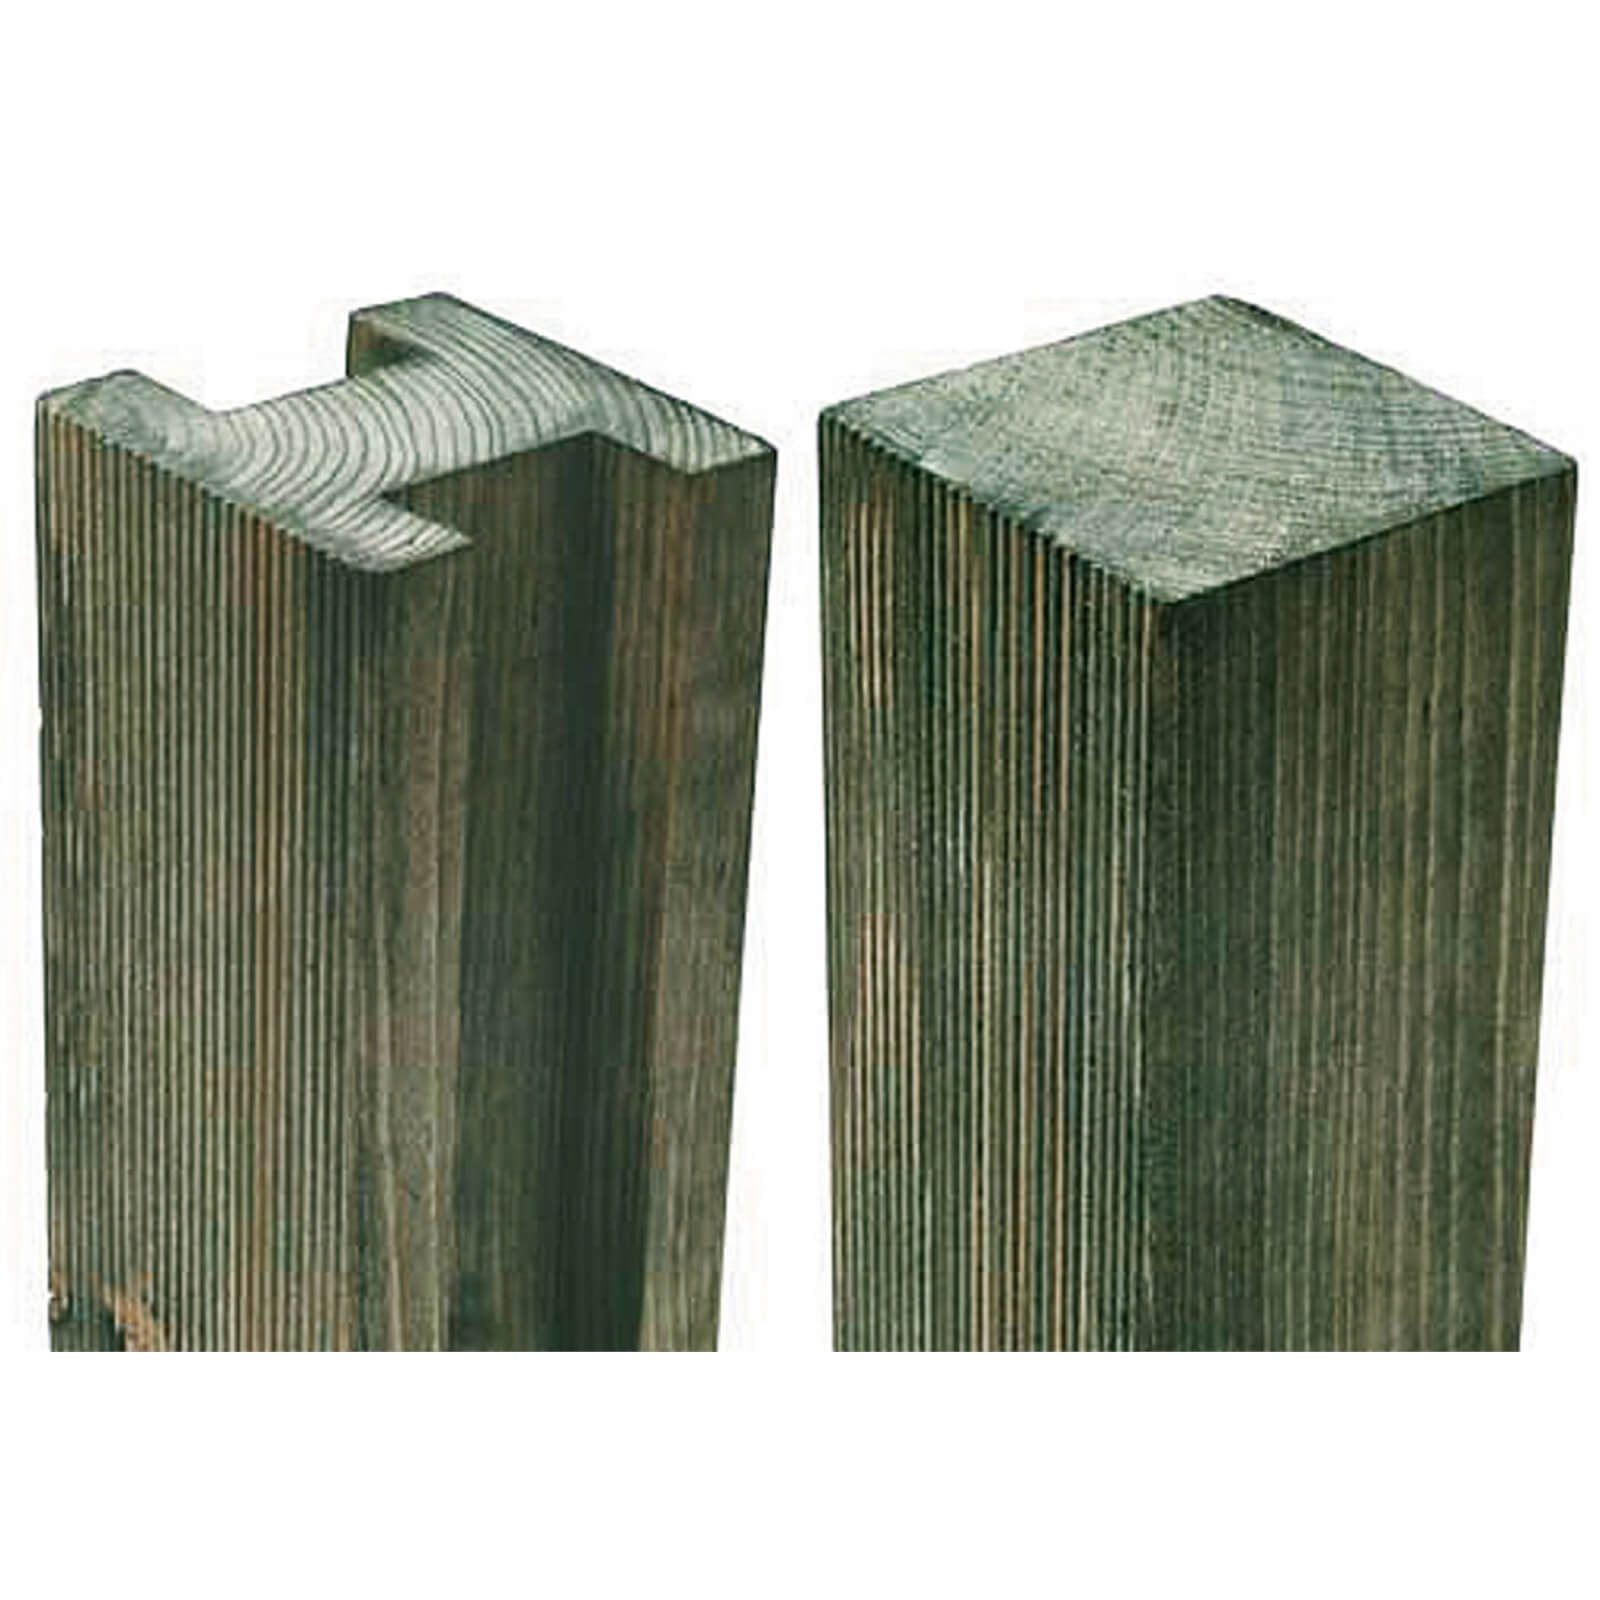 Forest Fence Post 2.4m ( 50 x 50 x 2400mm)